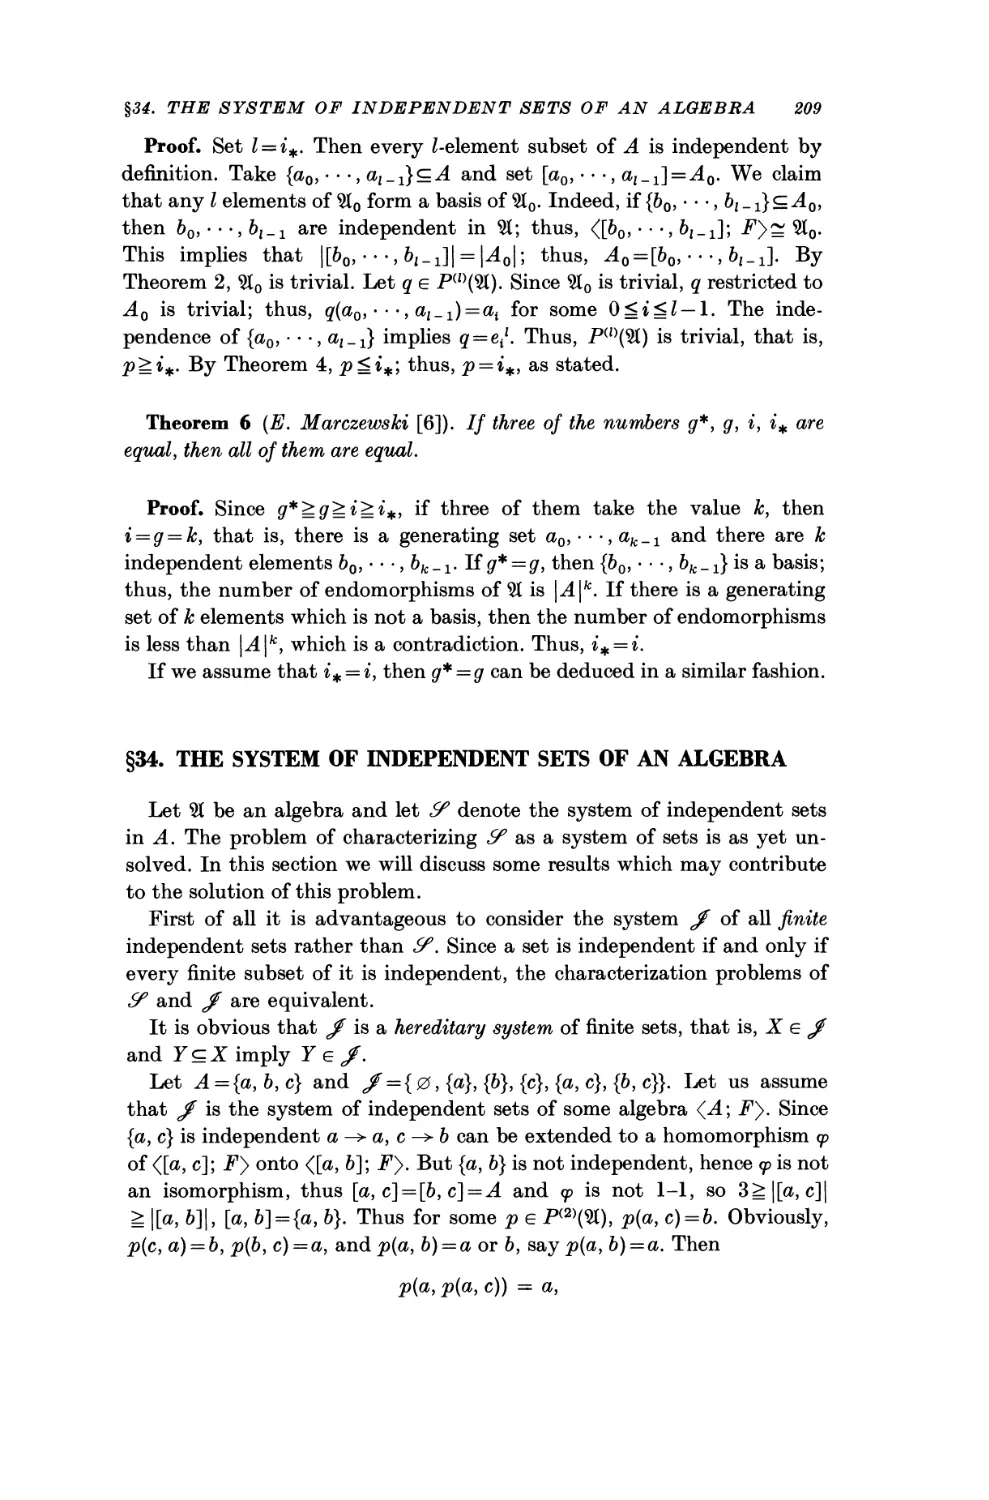 §34. The System of Independent Sets of an Algebra